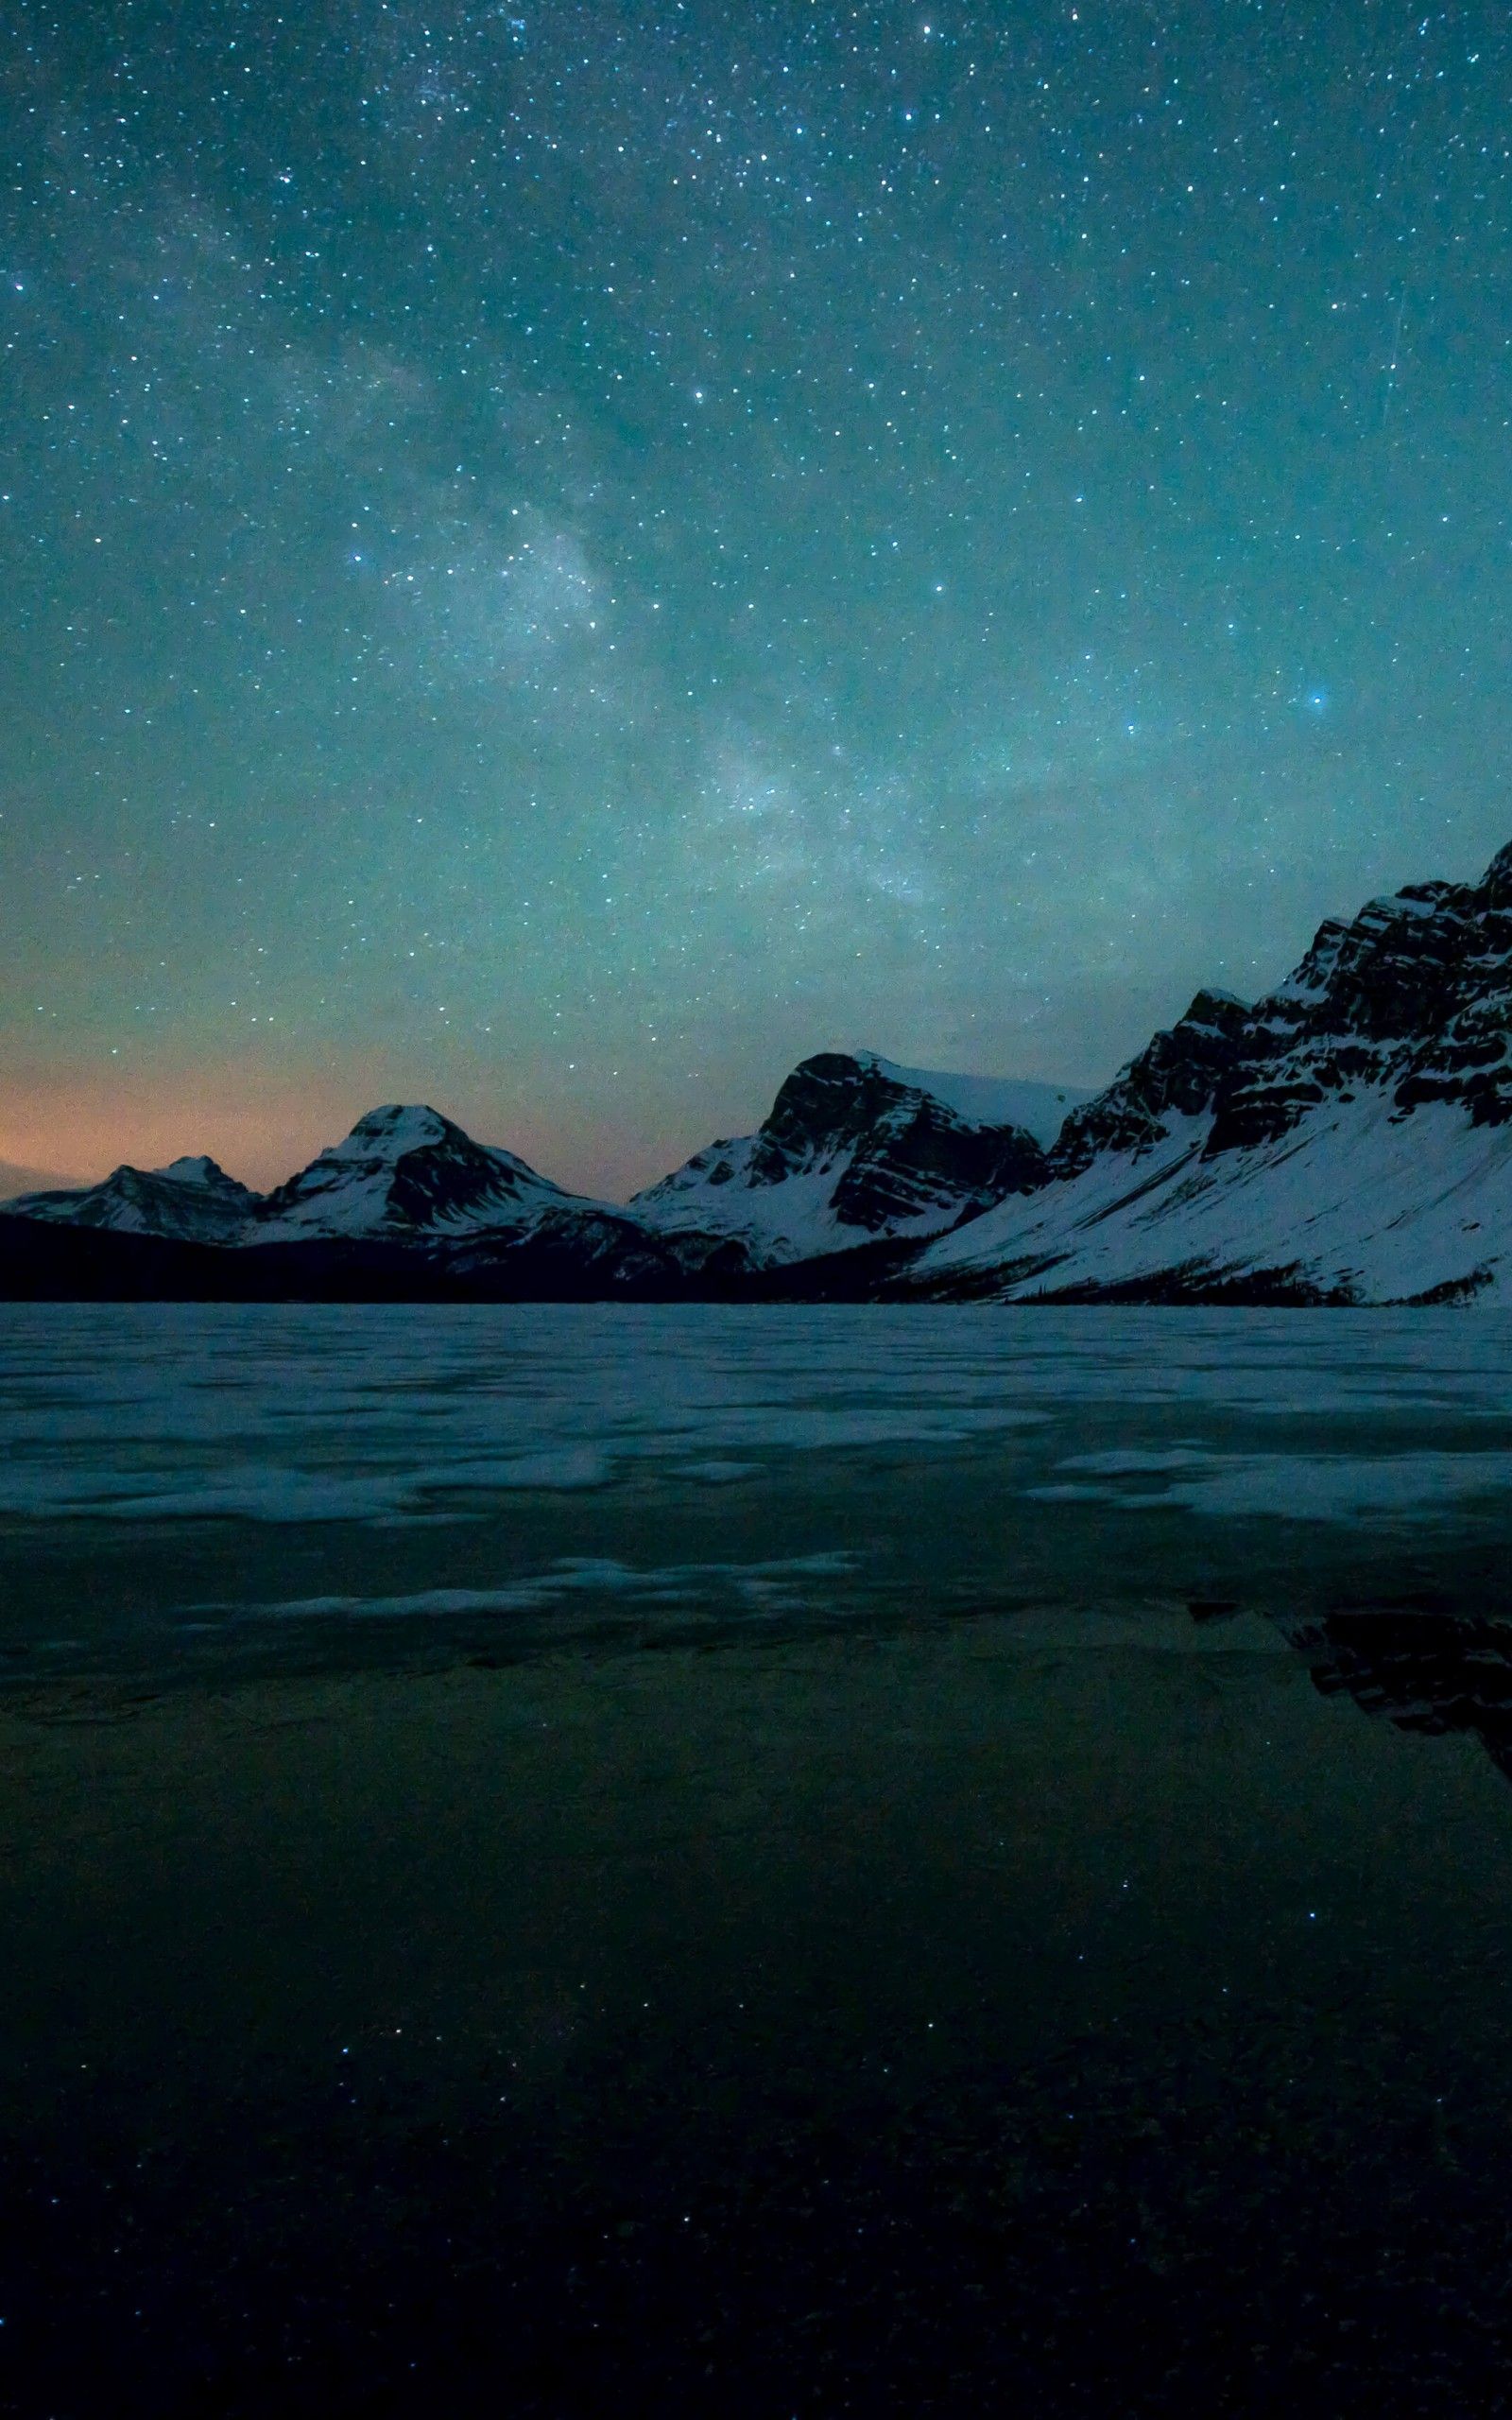 Download Milky Way over Bow Lake, Alberta, Canada HD wallpaper for